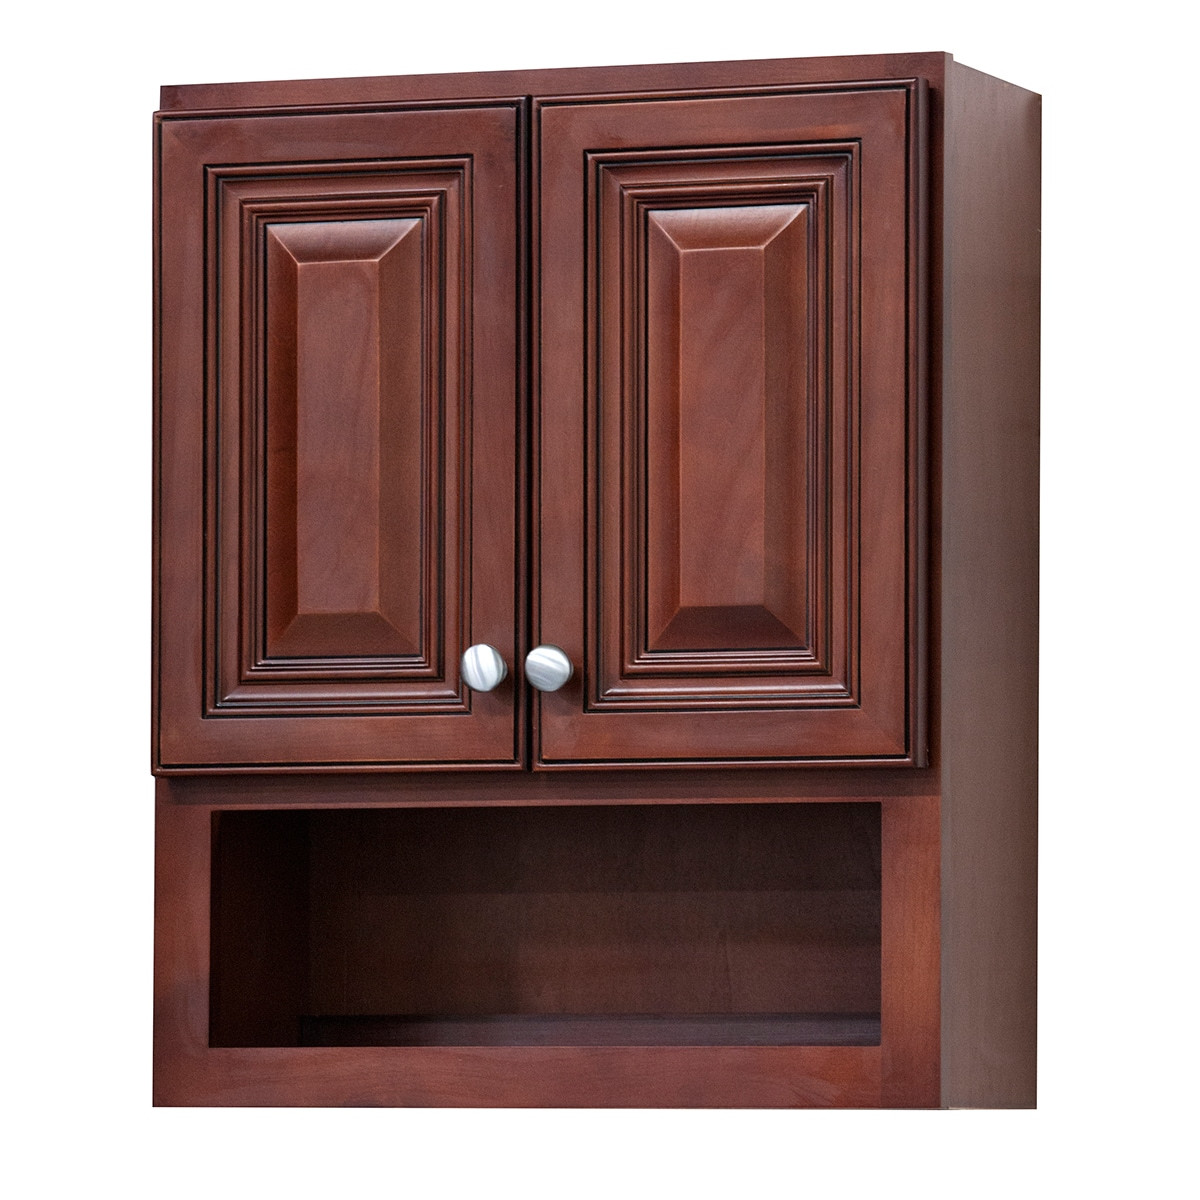 Cherry Bathroom Wall Cabinet Awesome Grand Reserve Cherry Bathroom Wall Cabinet Overstock